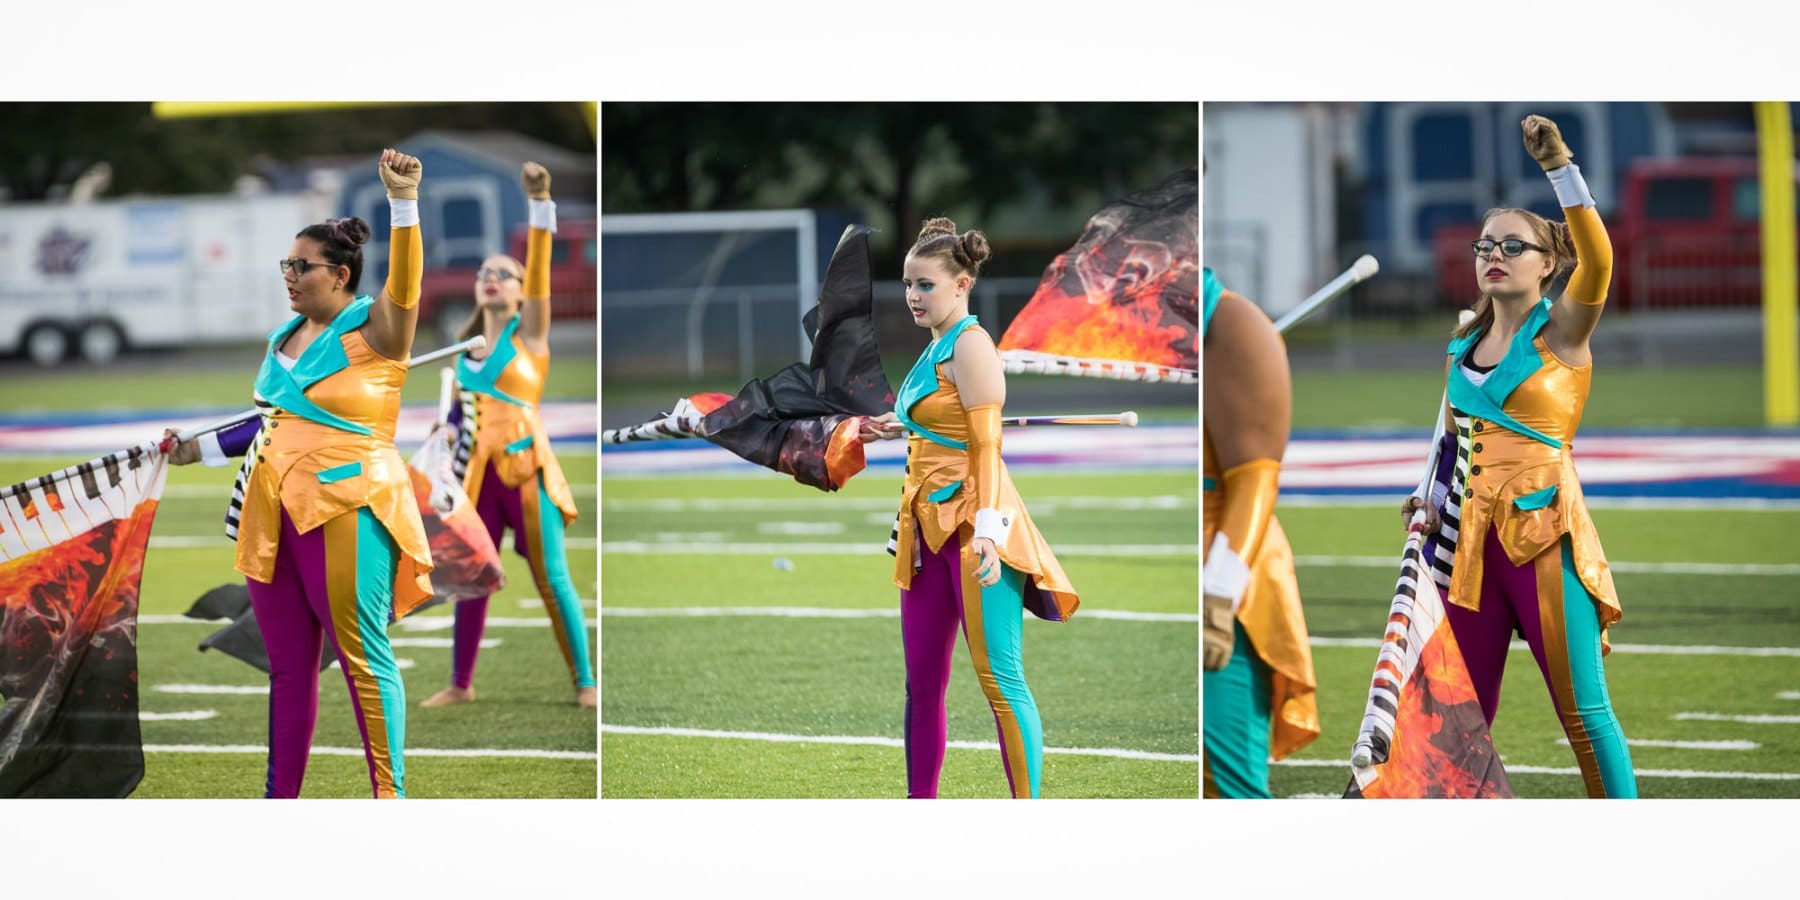 This colorguard example shows how Memory Books can showcase everyone in the school.